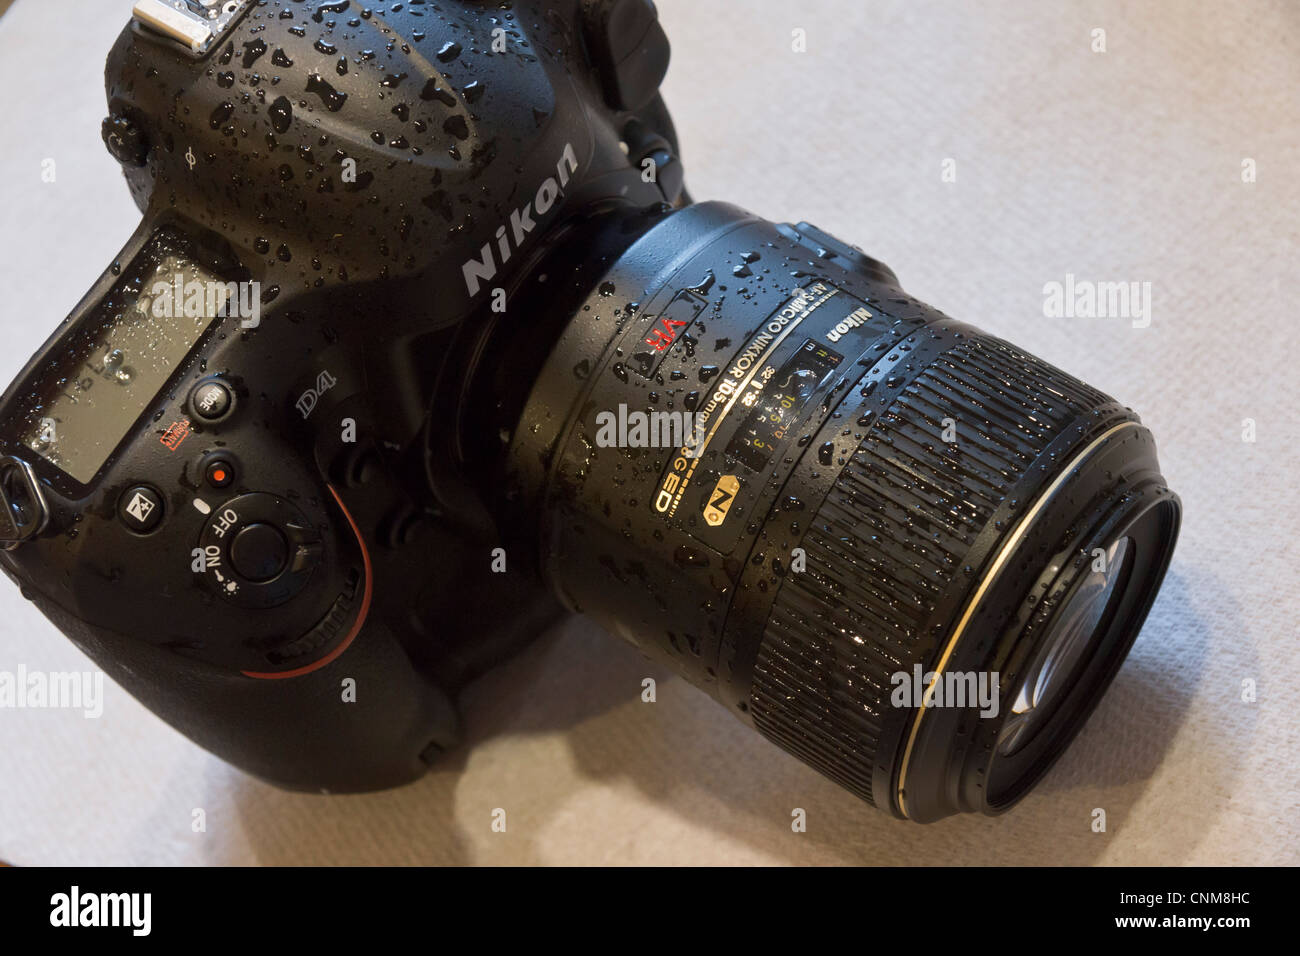 Photographic equipment - Nikon D4 wet from rain - waterproof lens and body. Stock Photo